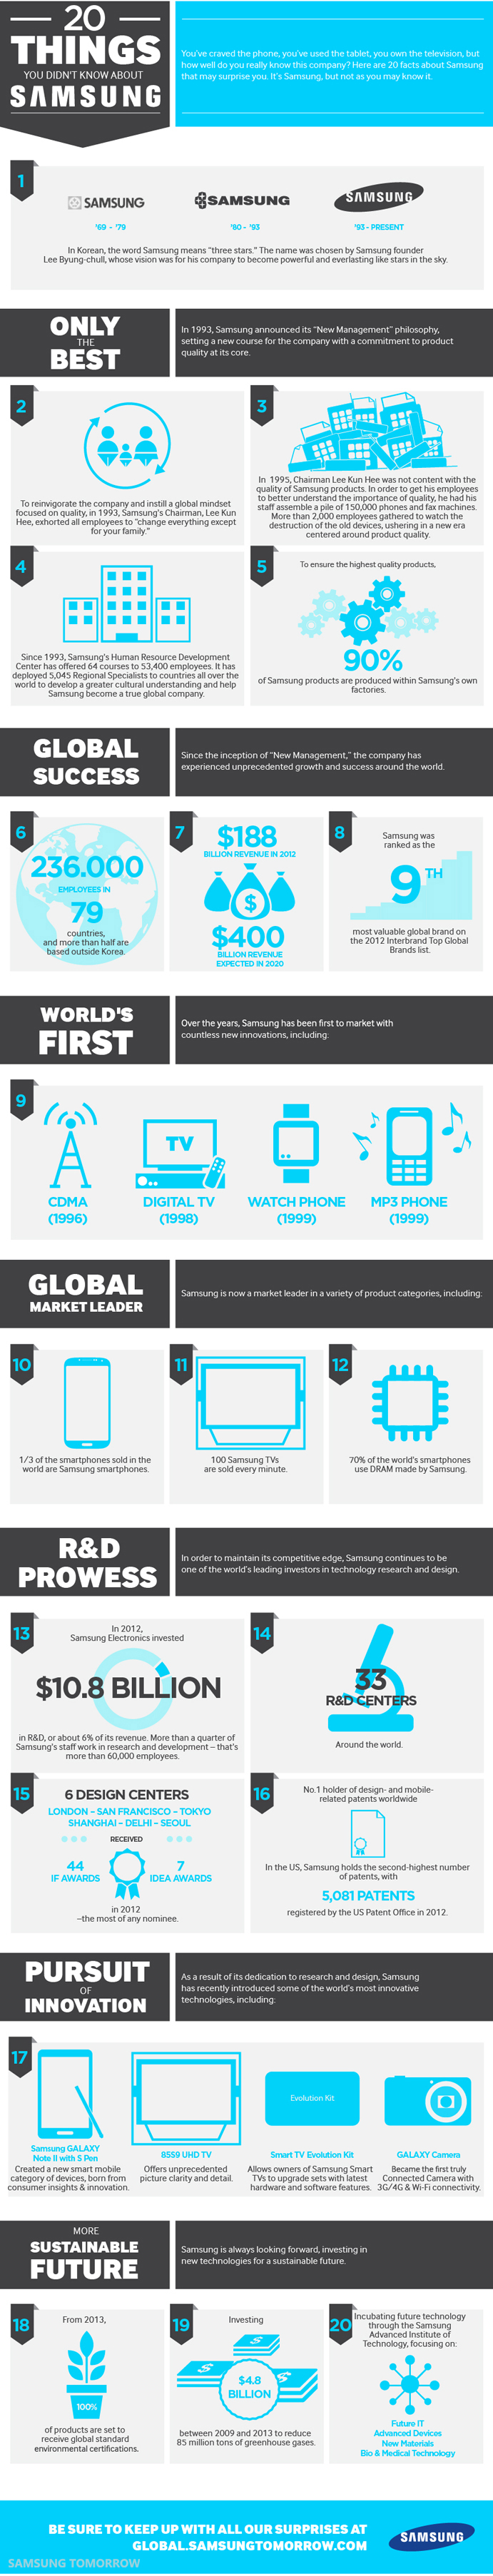 Samsung Facts And Figures, 2013